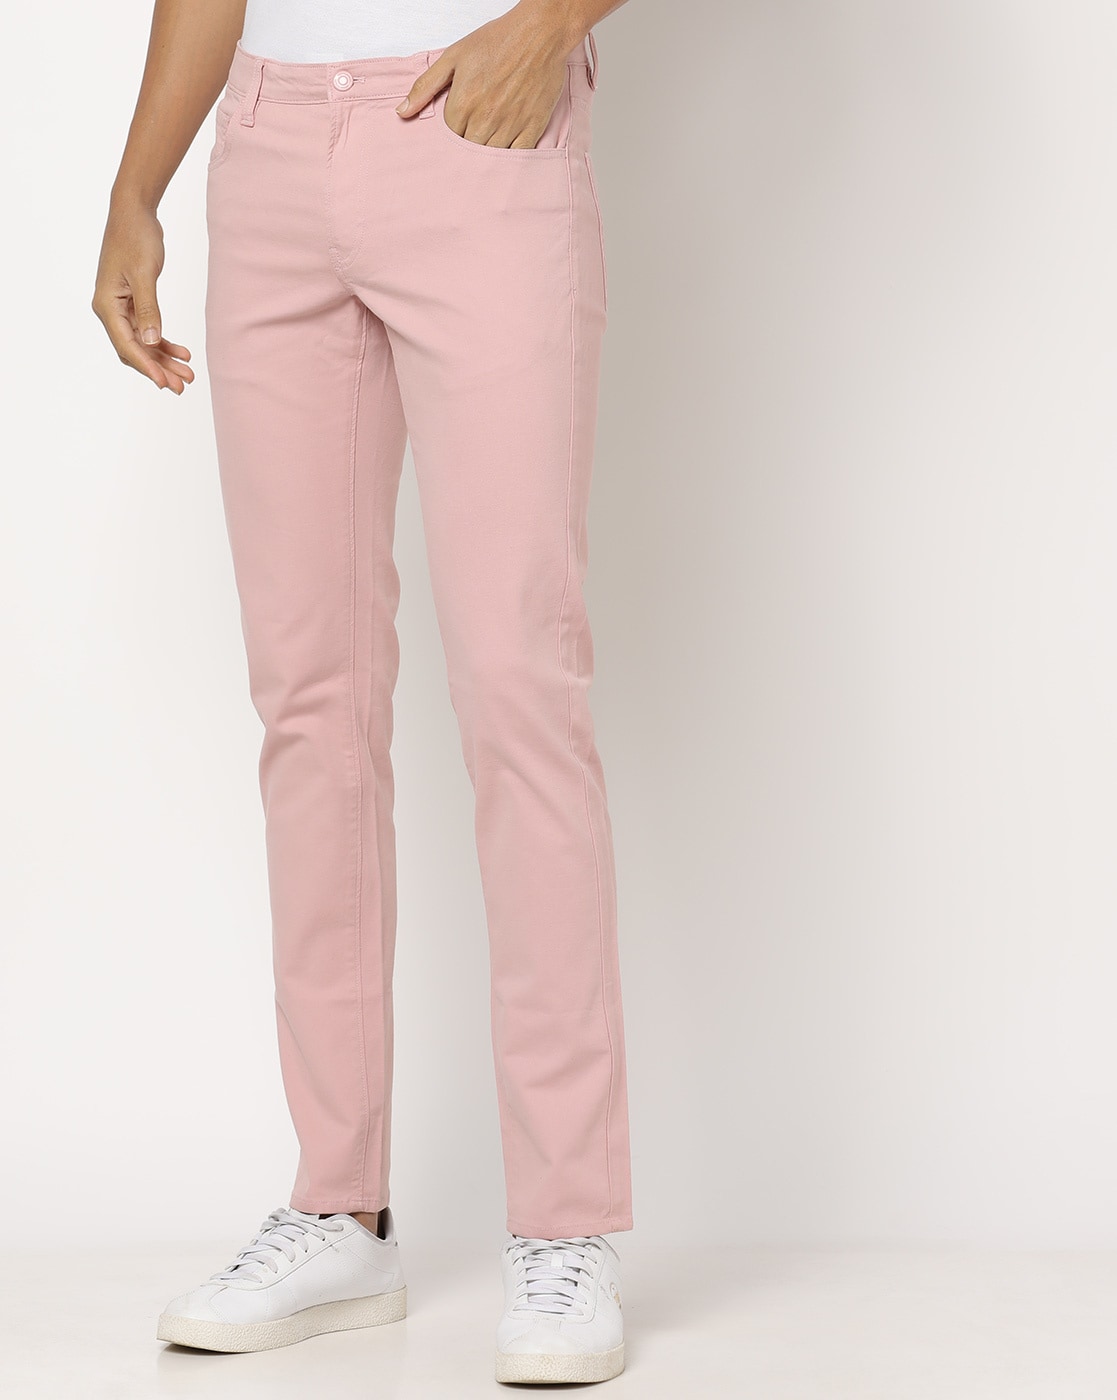 Qua Bottoms Pants and Trousers  Buy Navy Blue Solid Textured Crepe Modern  Trousers Online  Nykaa Fashion